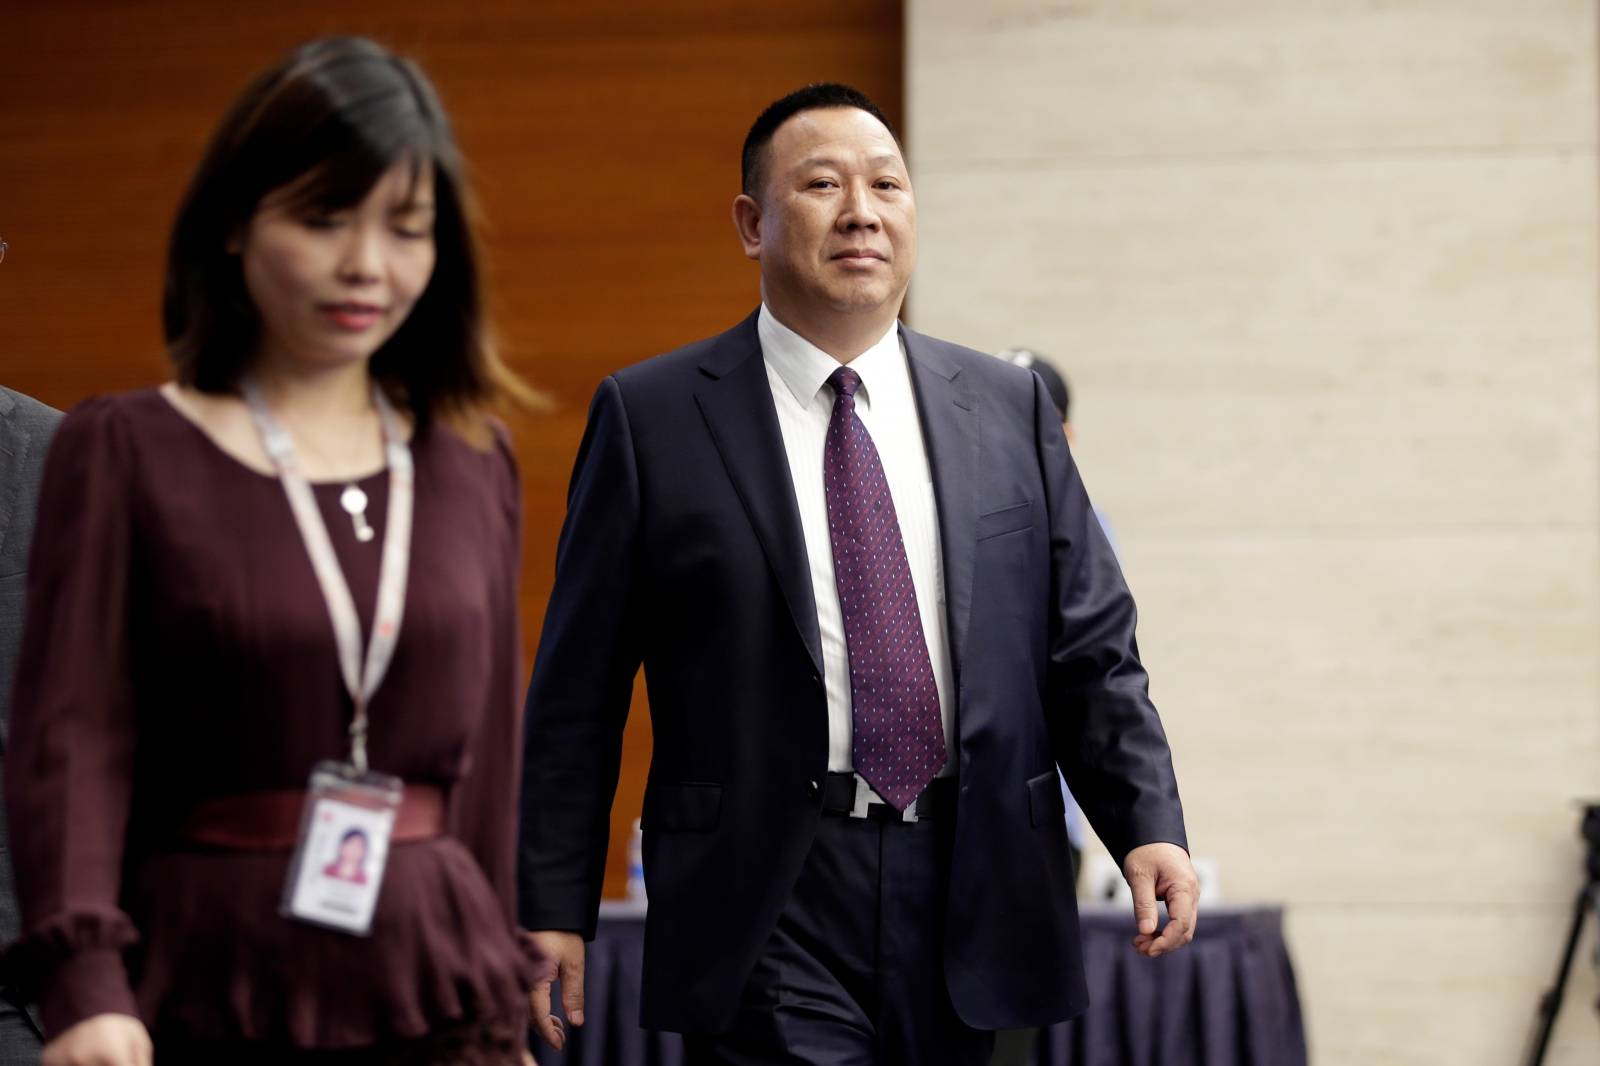 Huawei's Chief Legal Officer Song Liuping arrives for a news conference on Huaweiâs ongoing legal action against the U.S. governmentâs National Defense Authorization Act (NDAA) action at its headquarters in Shenzhen